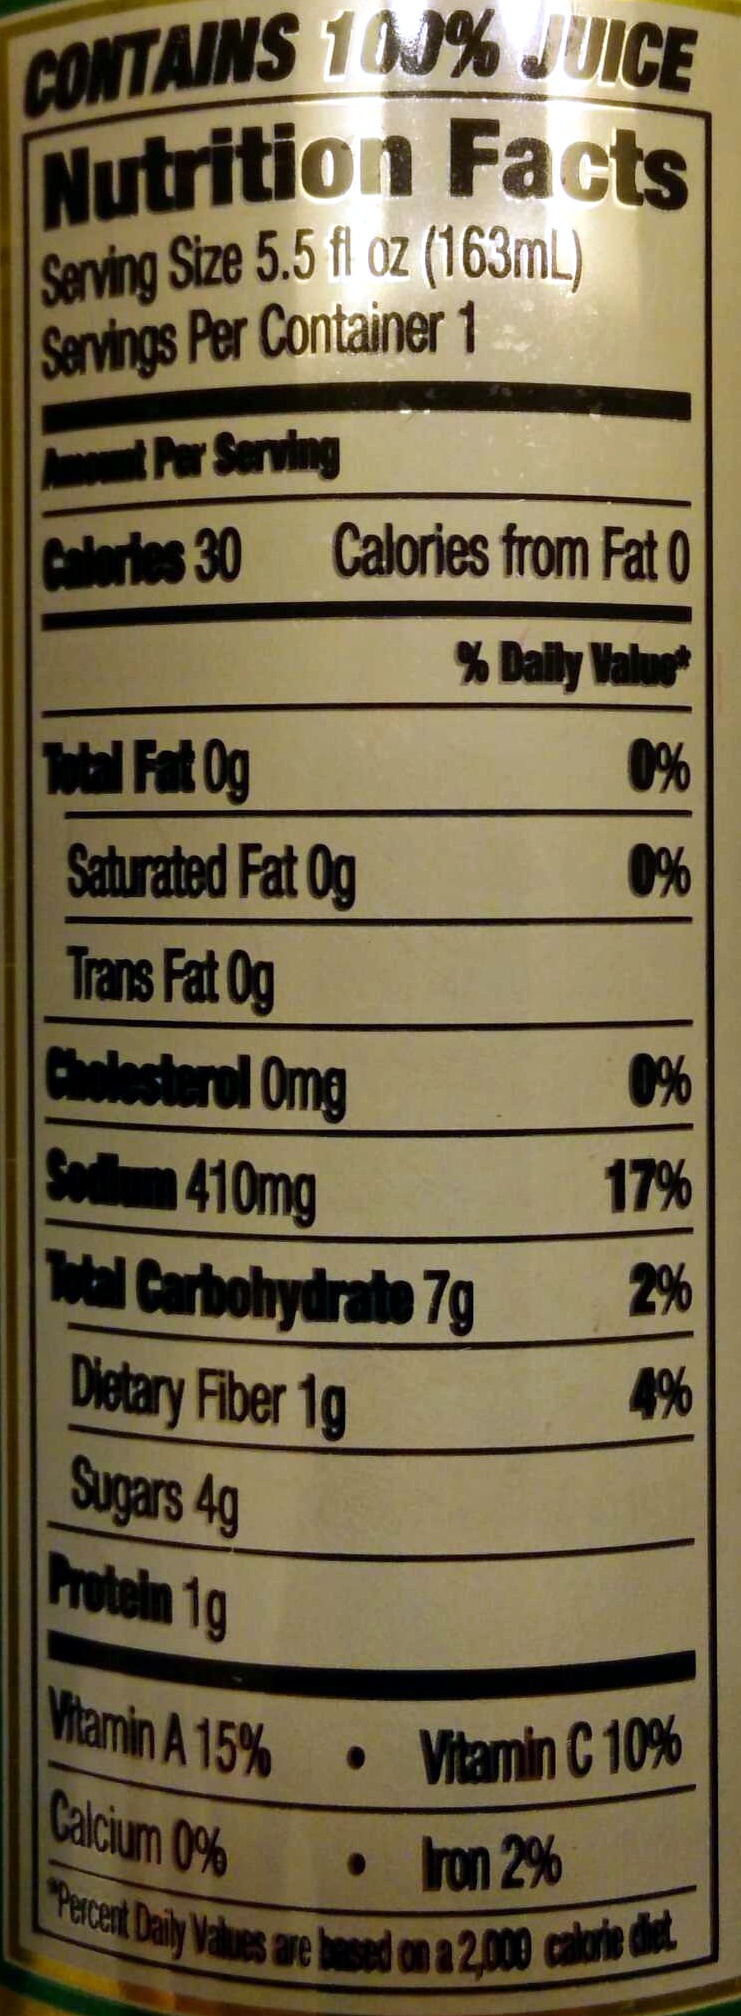 Tomato Juice from Concentrate - Nutrition facts